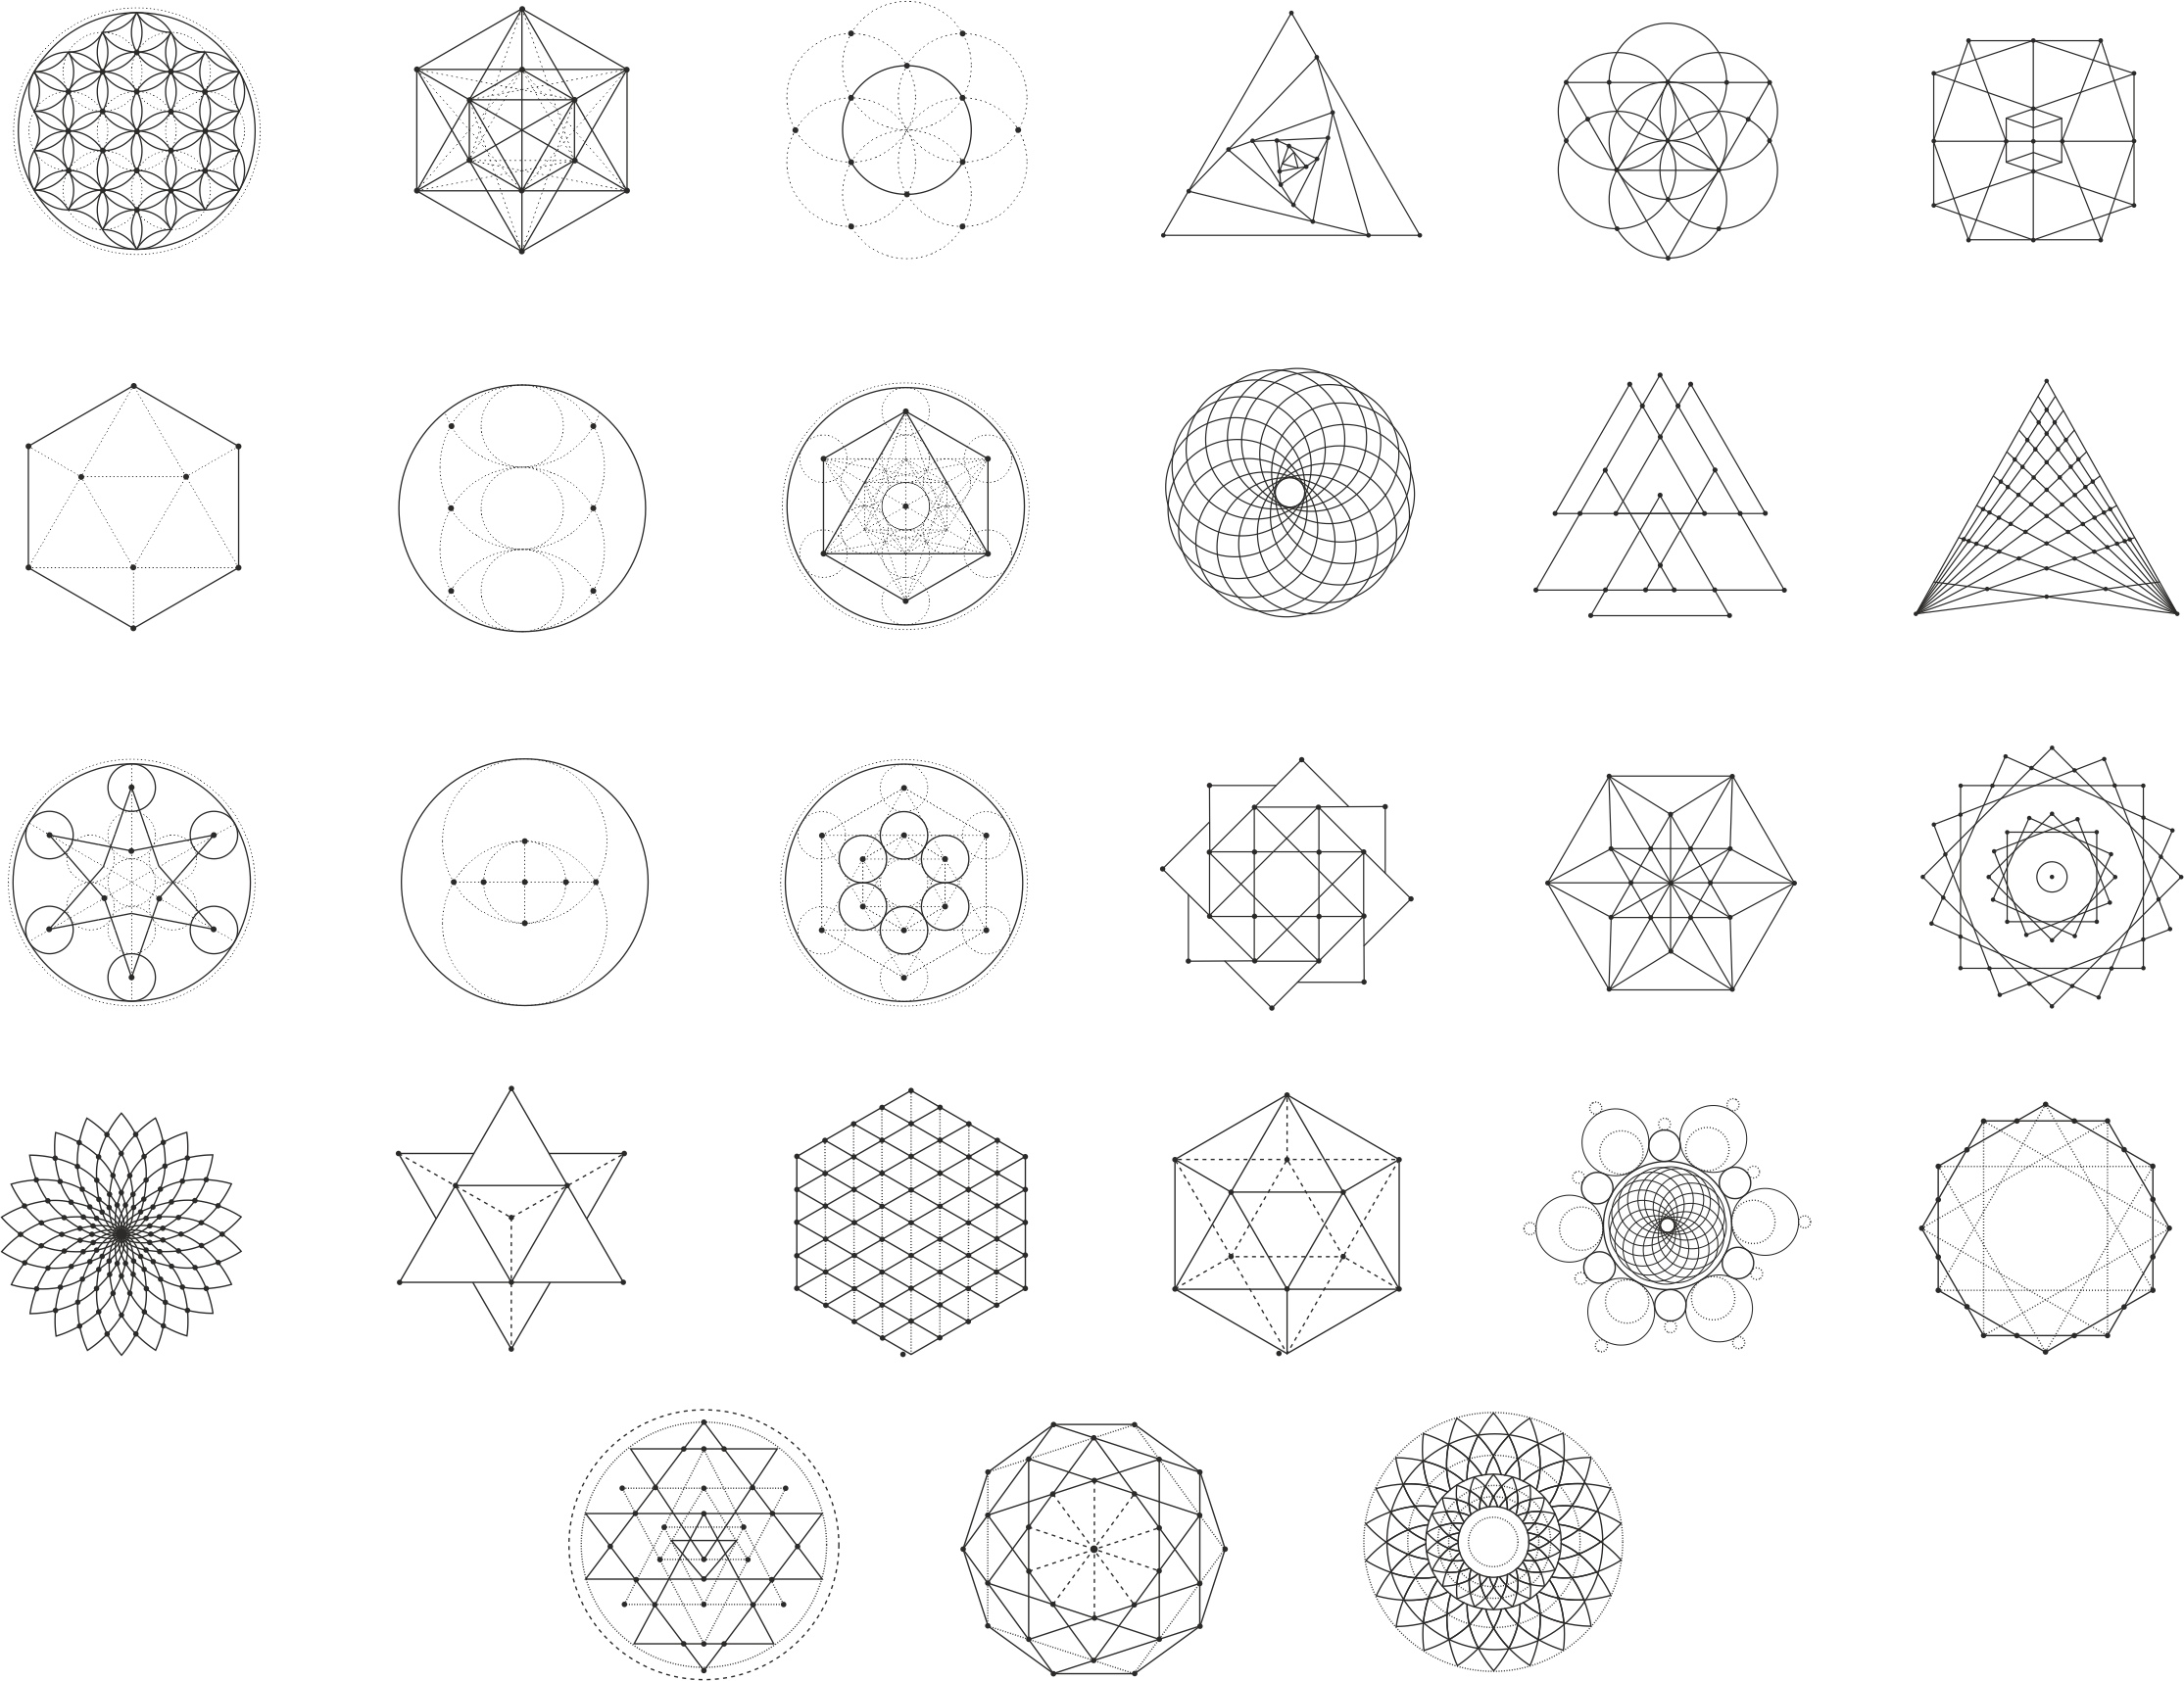 sacred-geometry-eps-free-vector-download-3axis-co